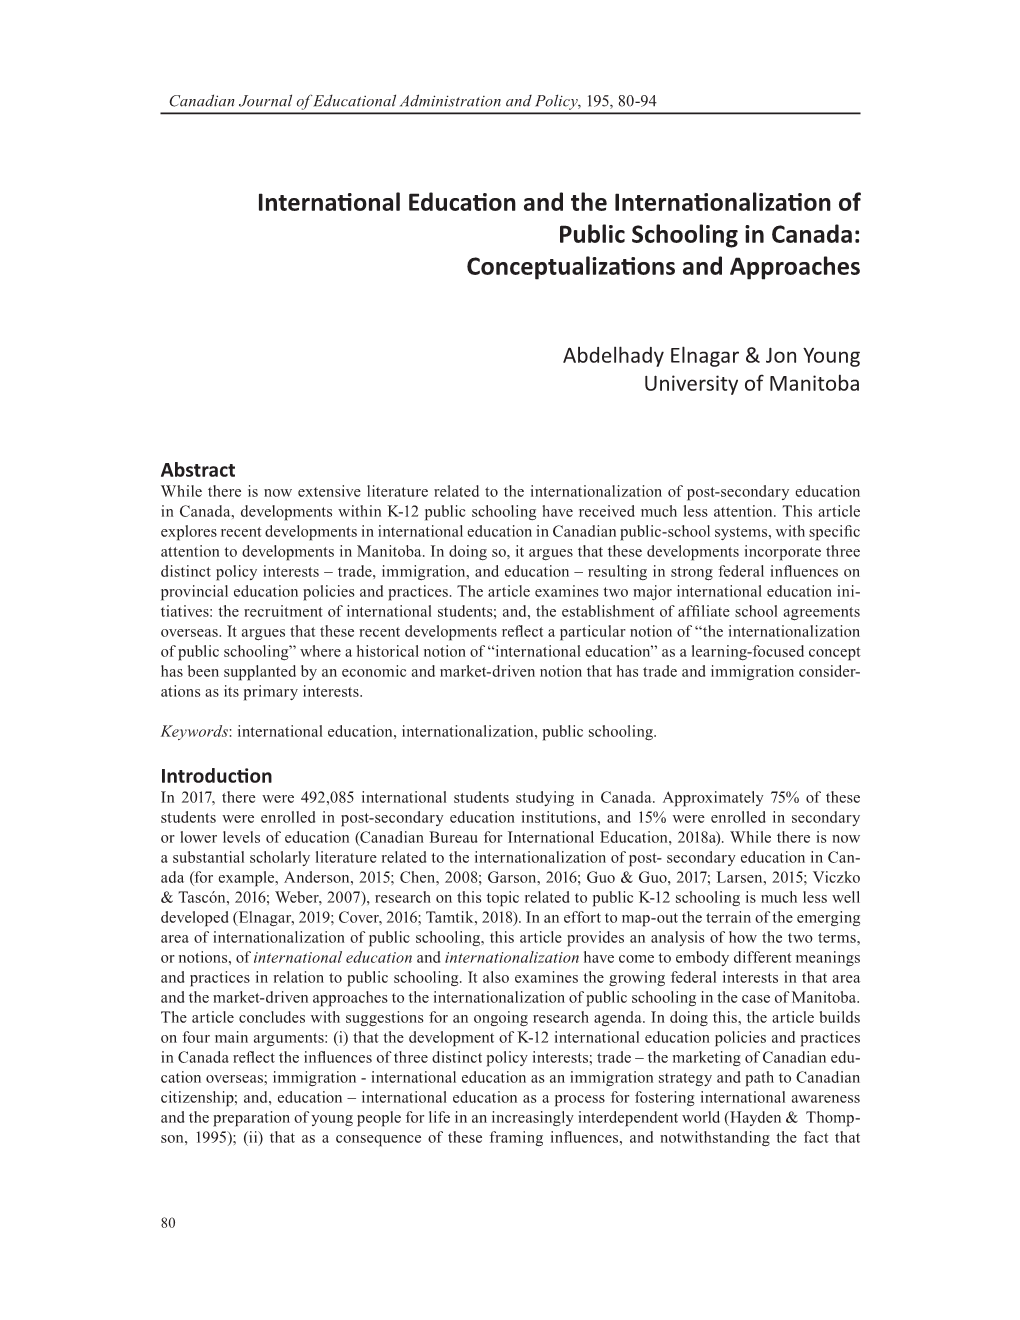 International Education and the Internationalization of Public Schooling in Canada: Conceptualizations and Approaches